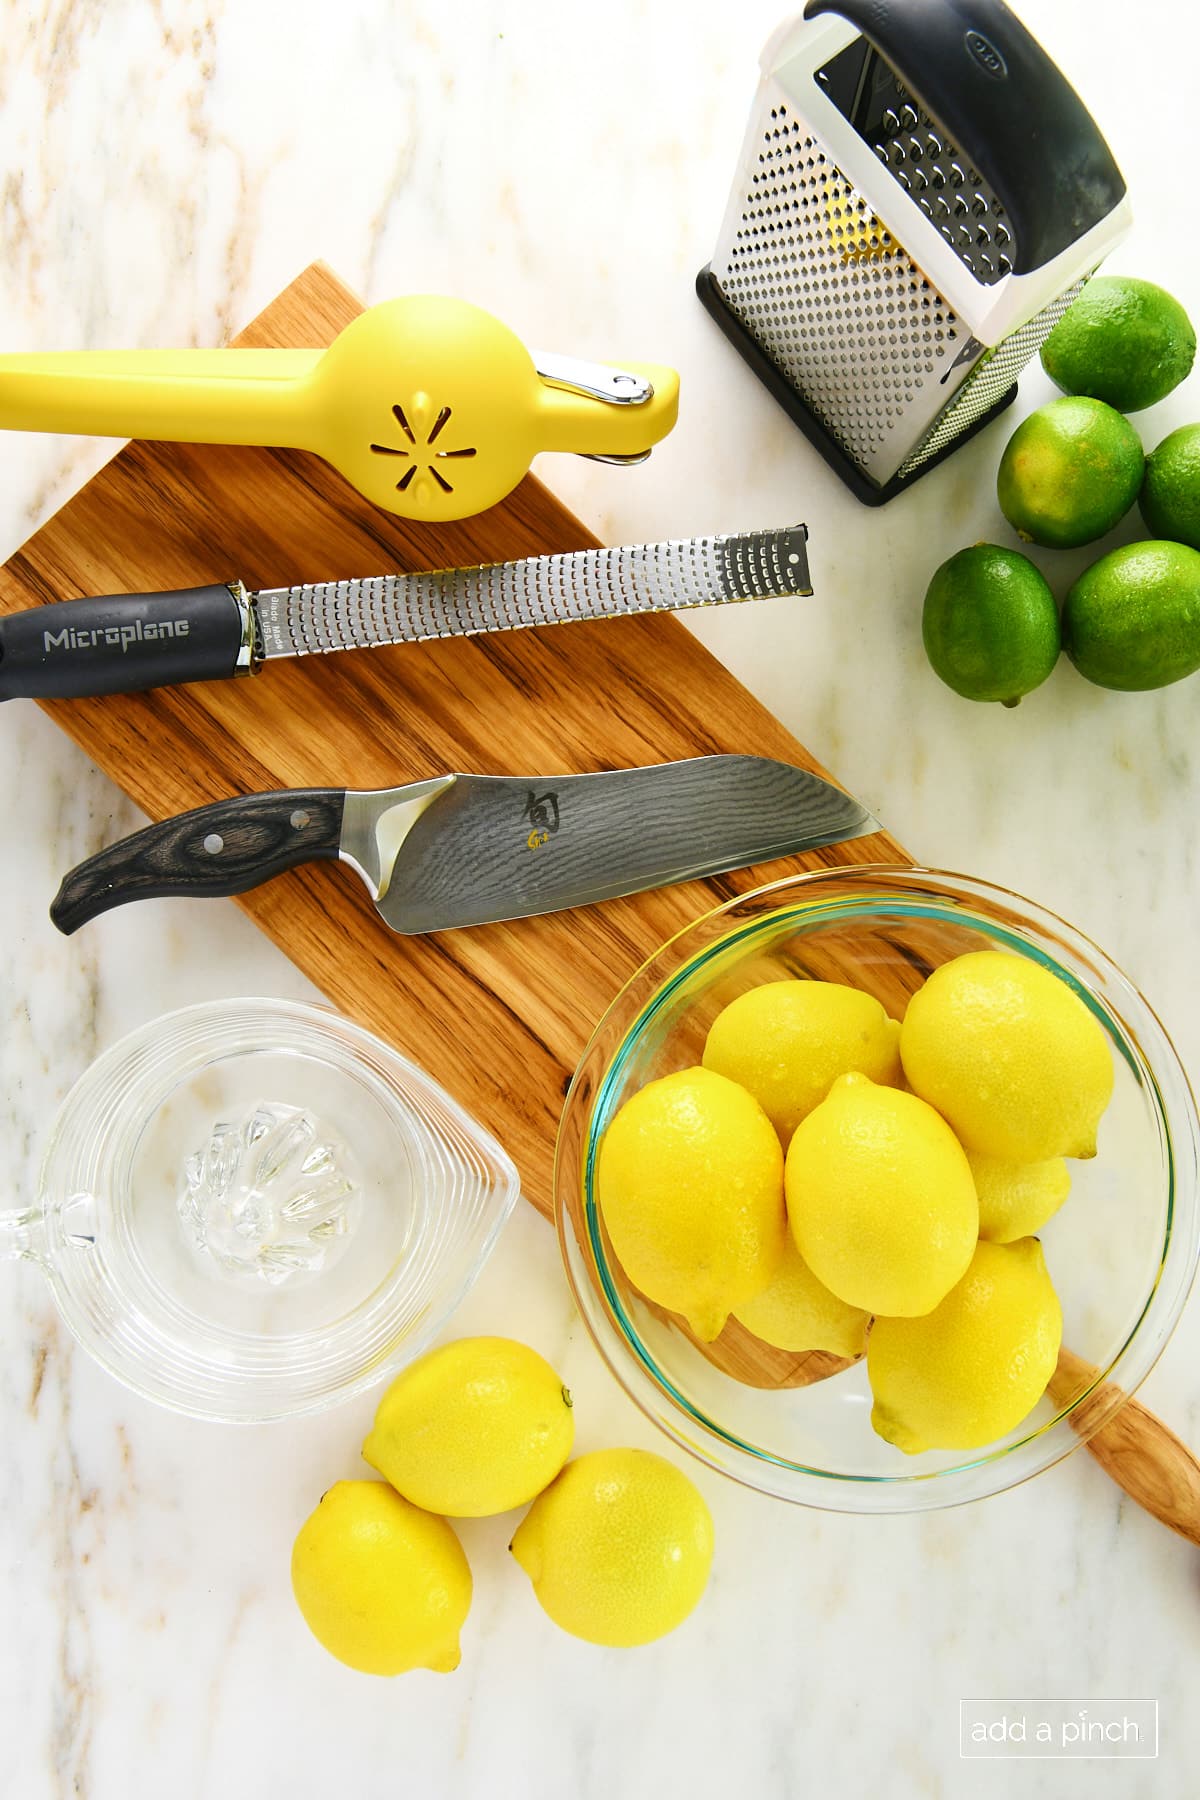 photo of marble surface with bowl of yellow lemons, chef's knife, yellow citrus juicer, and microplane on a cherry wooden board with yellow lemons and clear glass citrus juicer/reamer on left side of board and box grater and green limes on right side of board